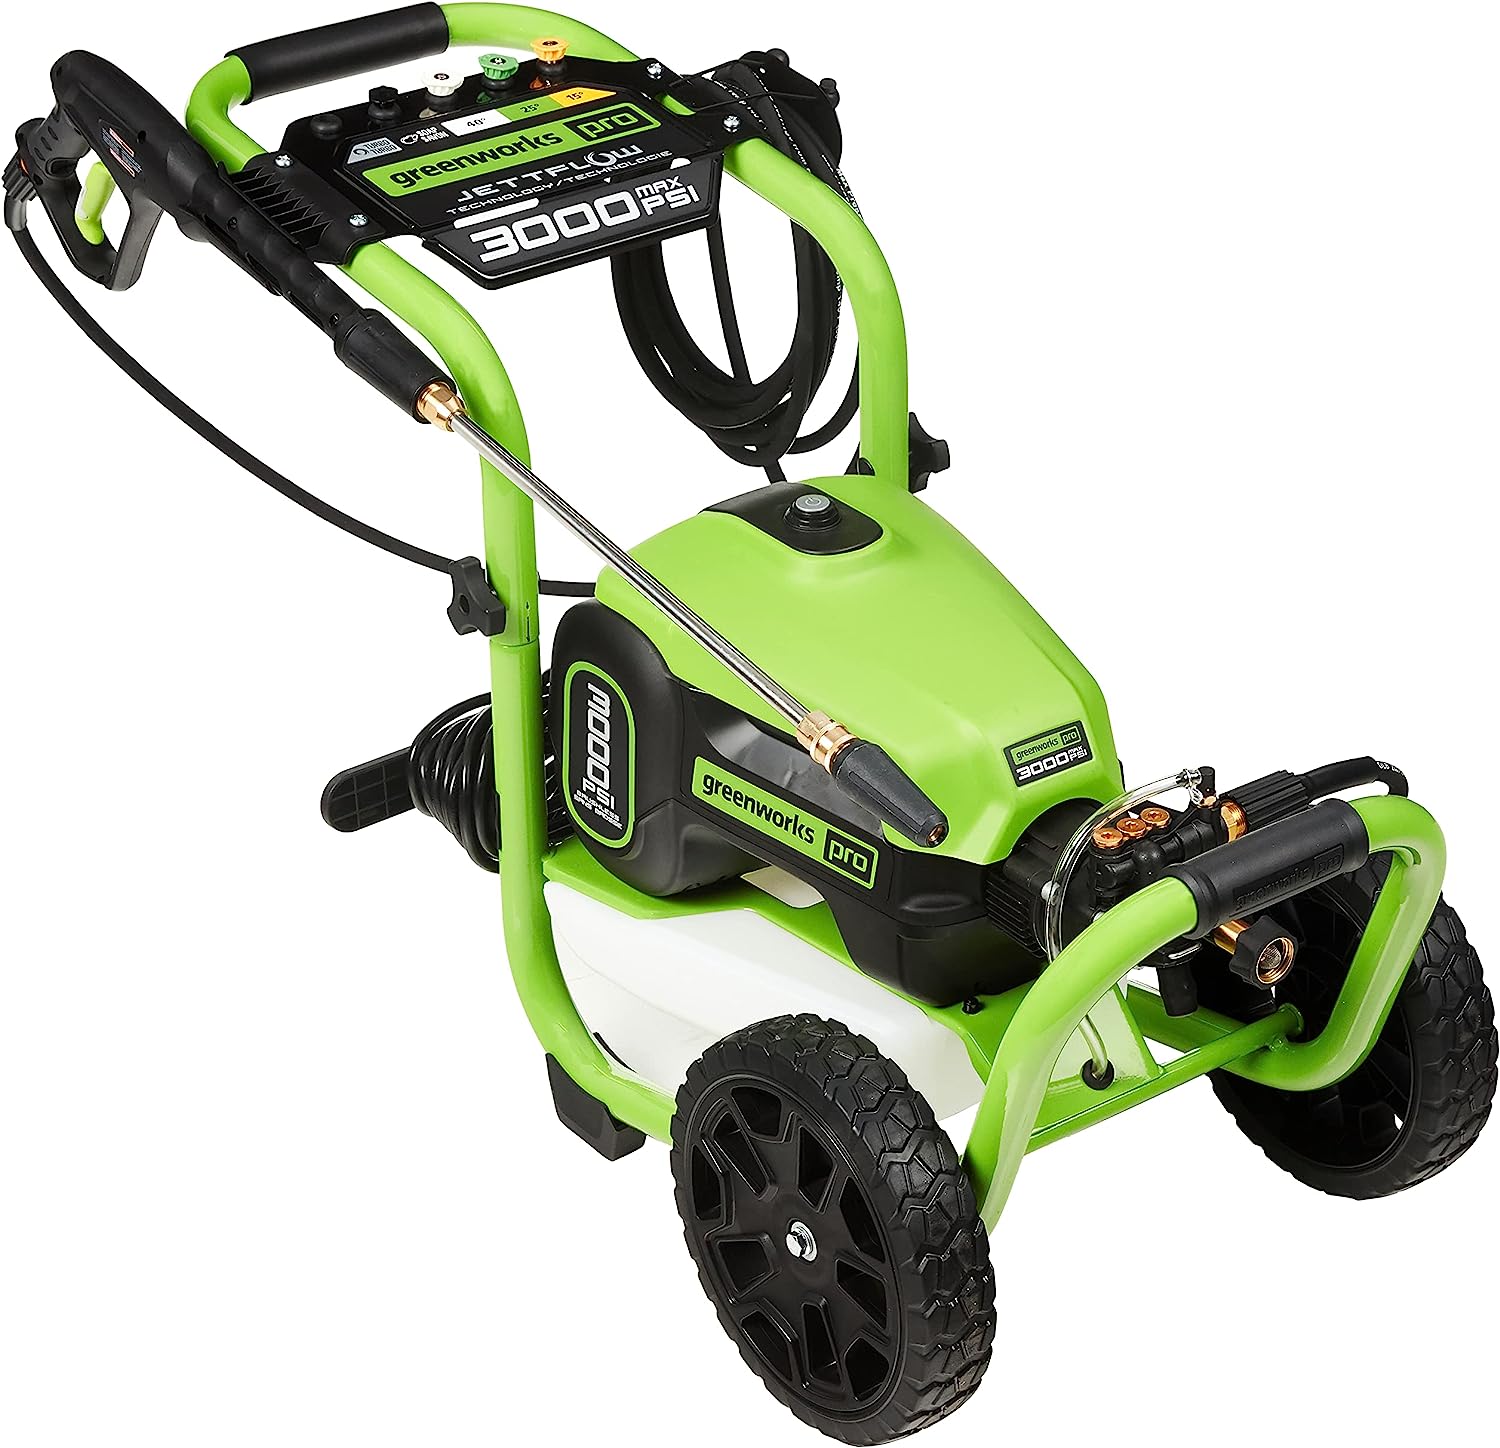 Greenworks - Trubrushless 3000 PSI electric pressure cleaner